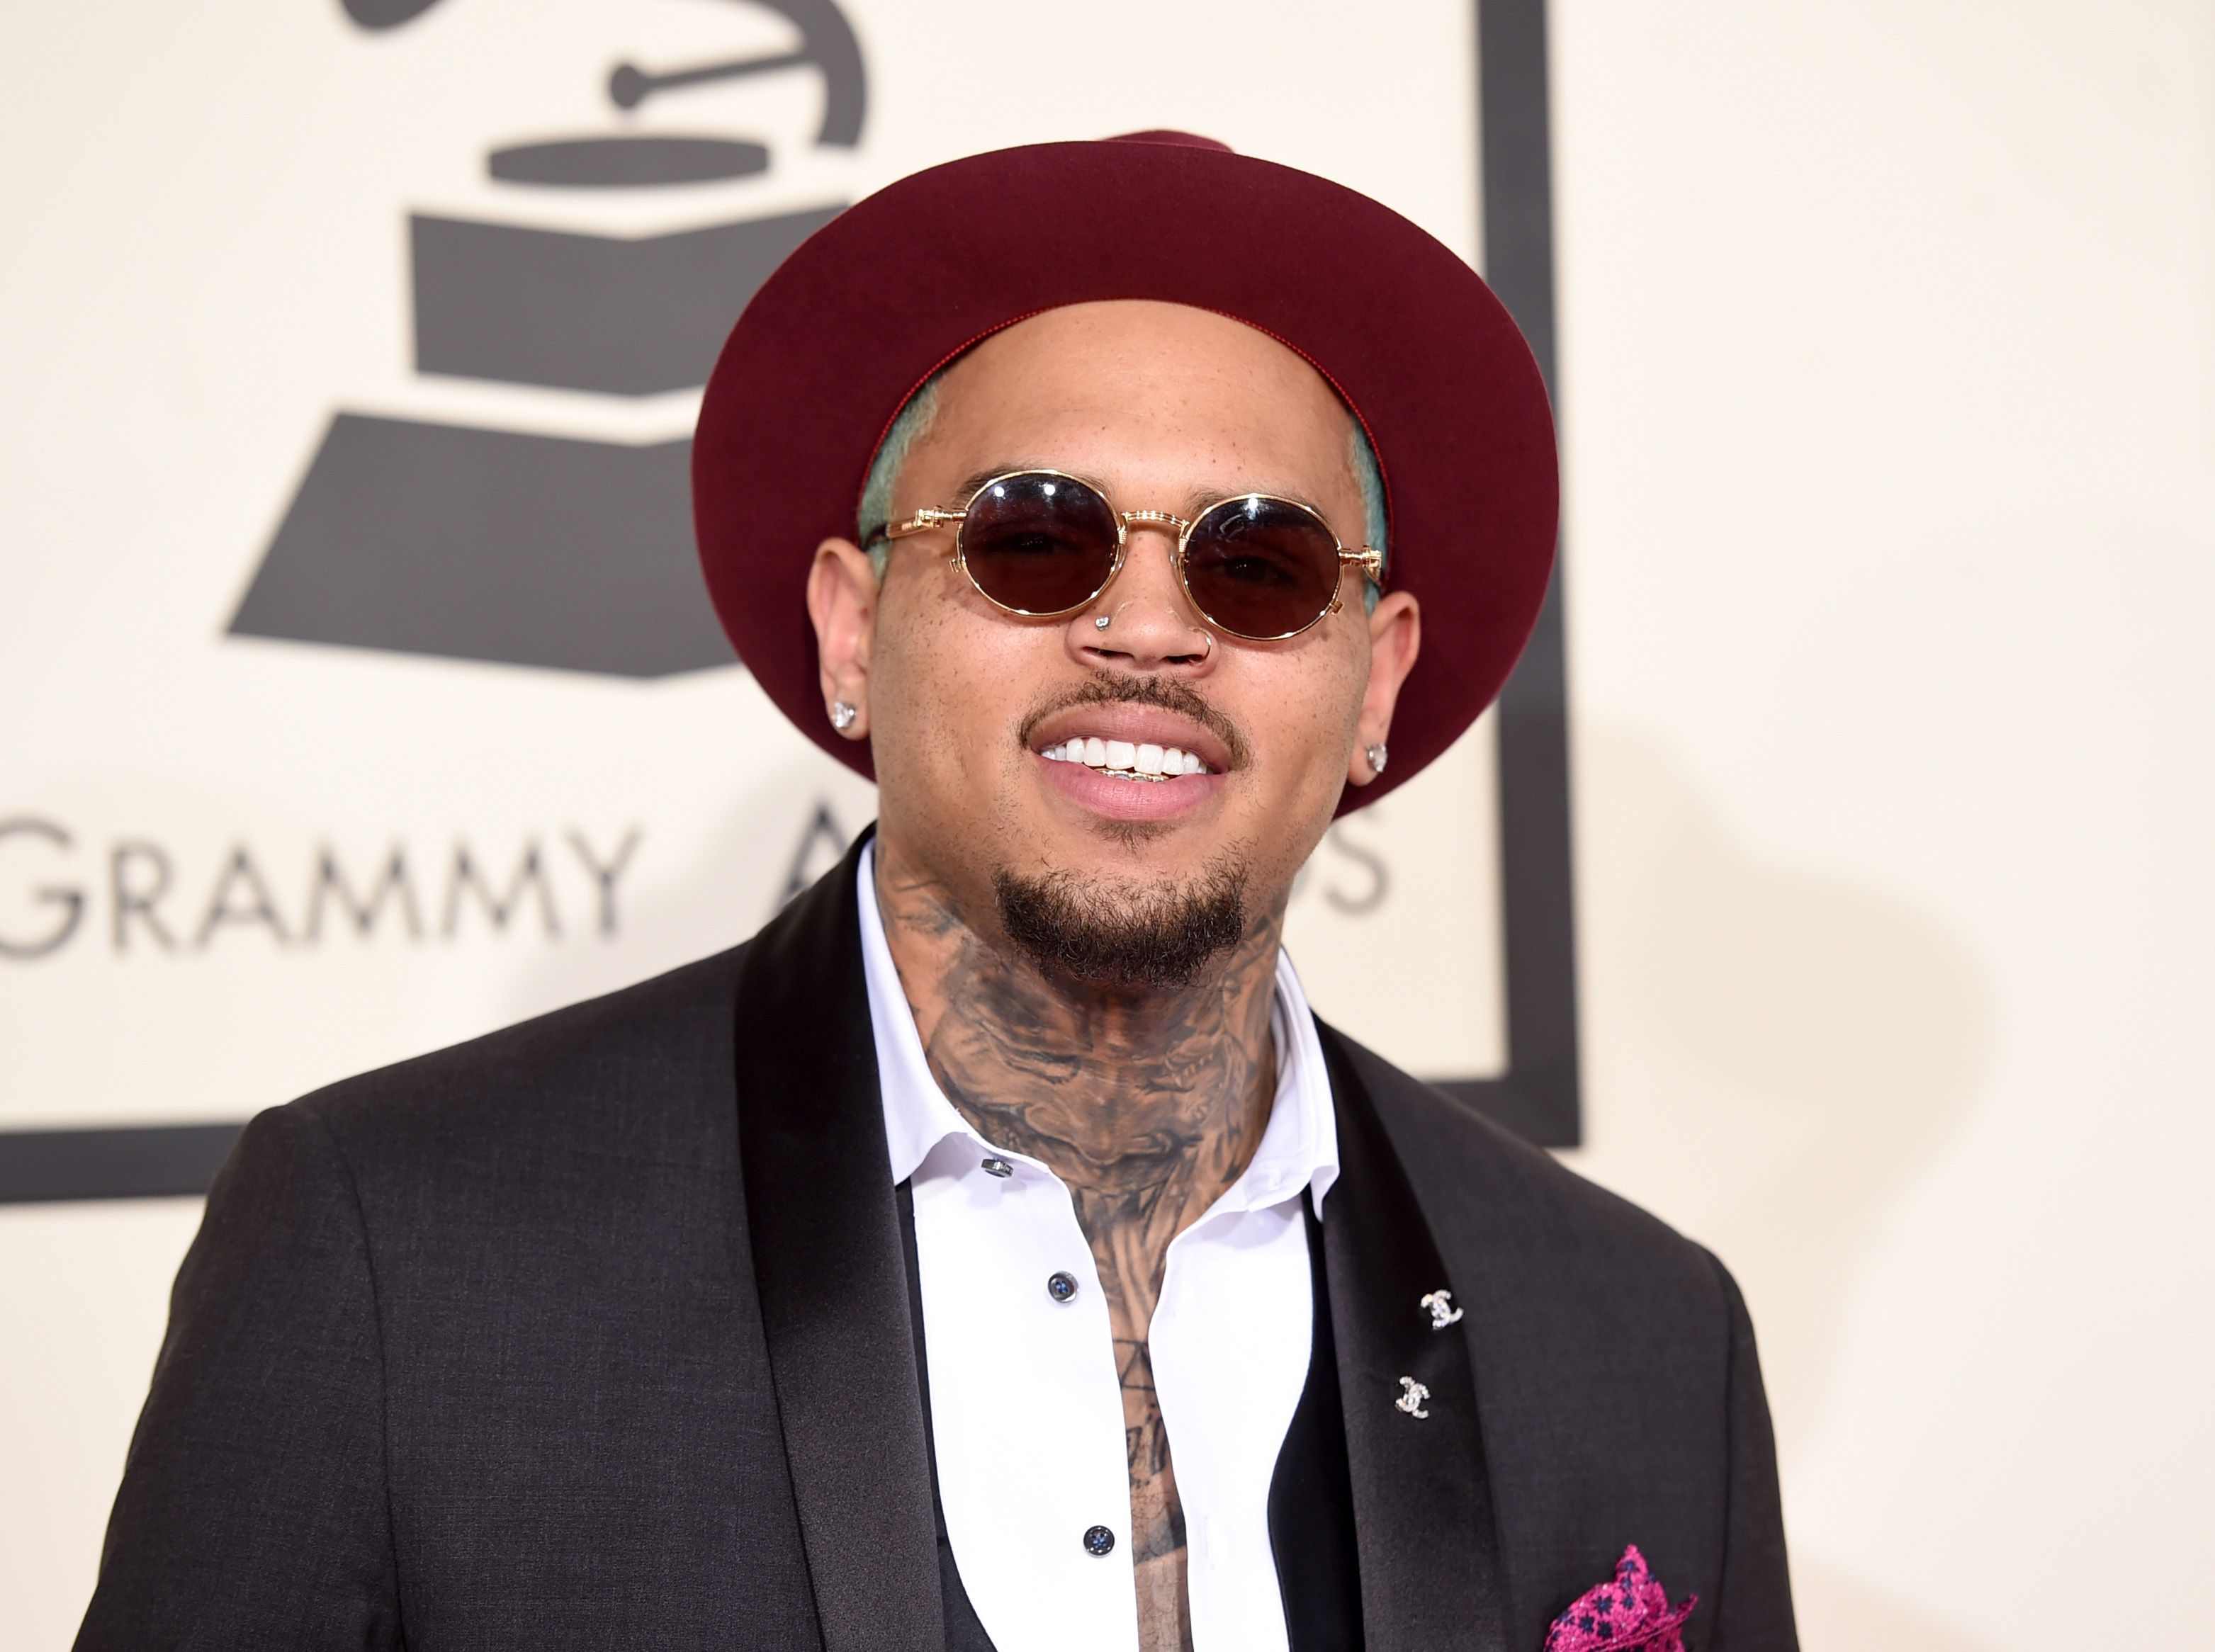 Singer Chris Brown at the 57th Annual Grammy Awards at the Staples Center on February 8, 2015 | Photo: Getty Images